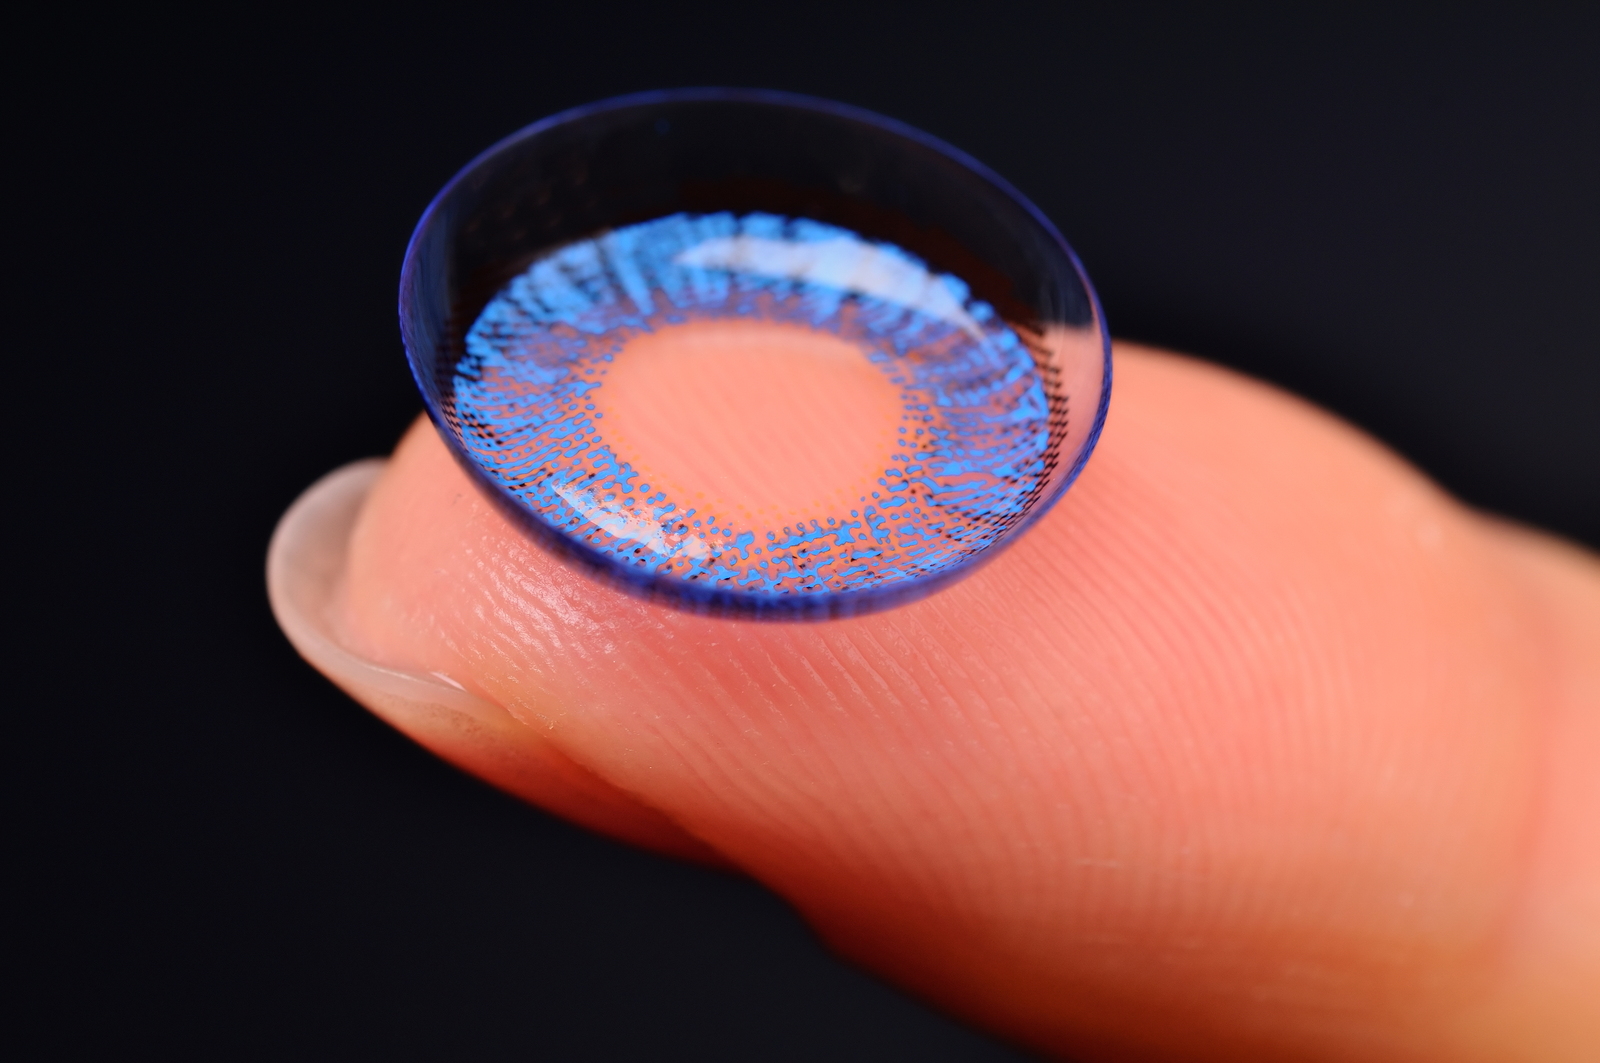 Coated Contact Lenses A New Trend in Ophthalmology